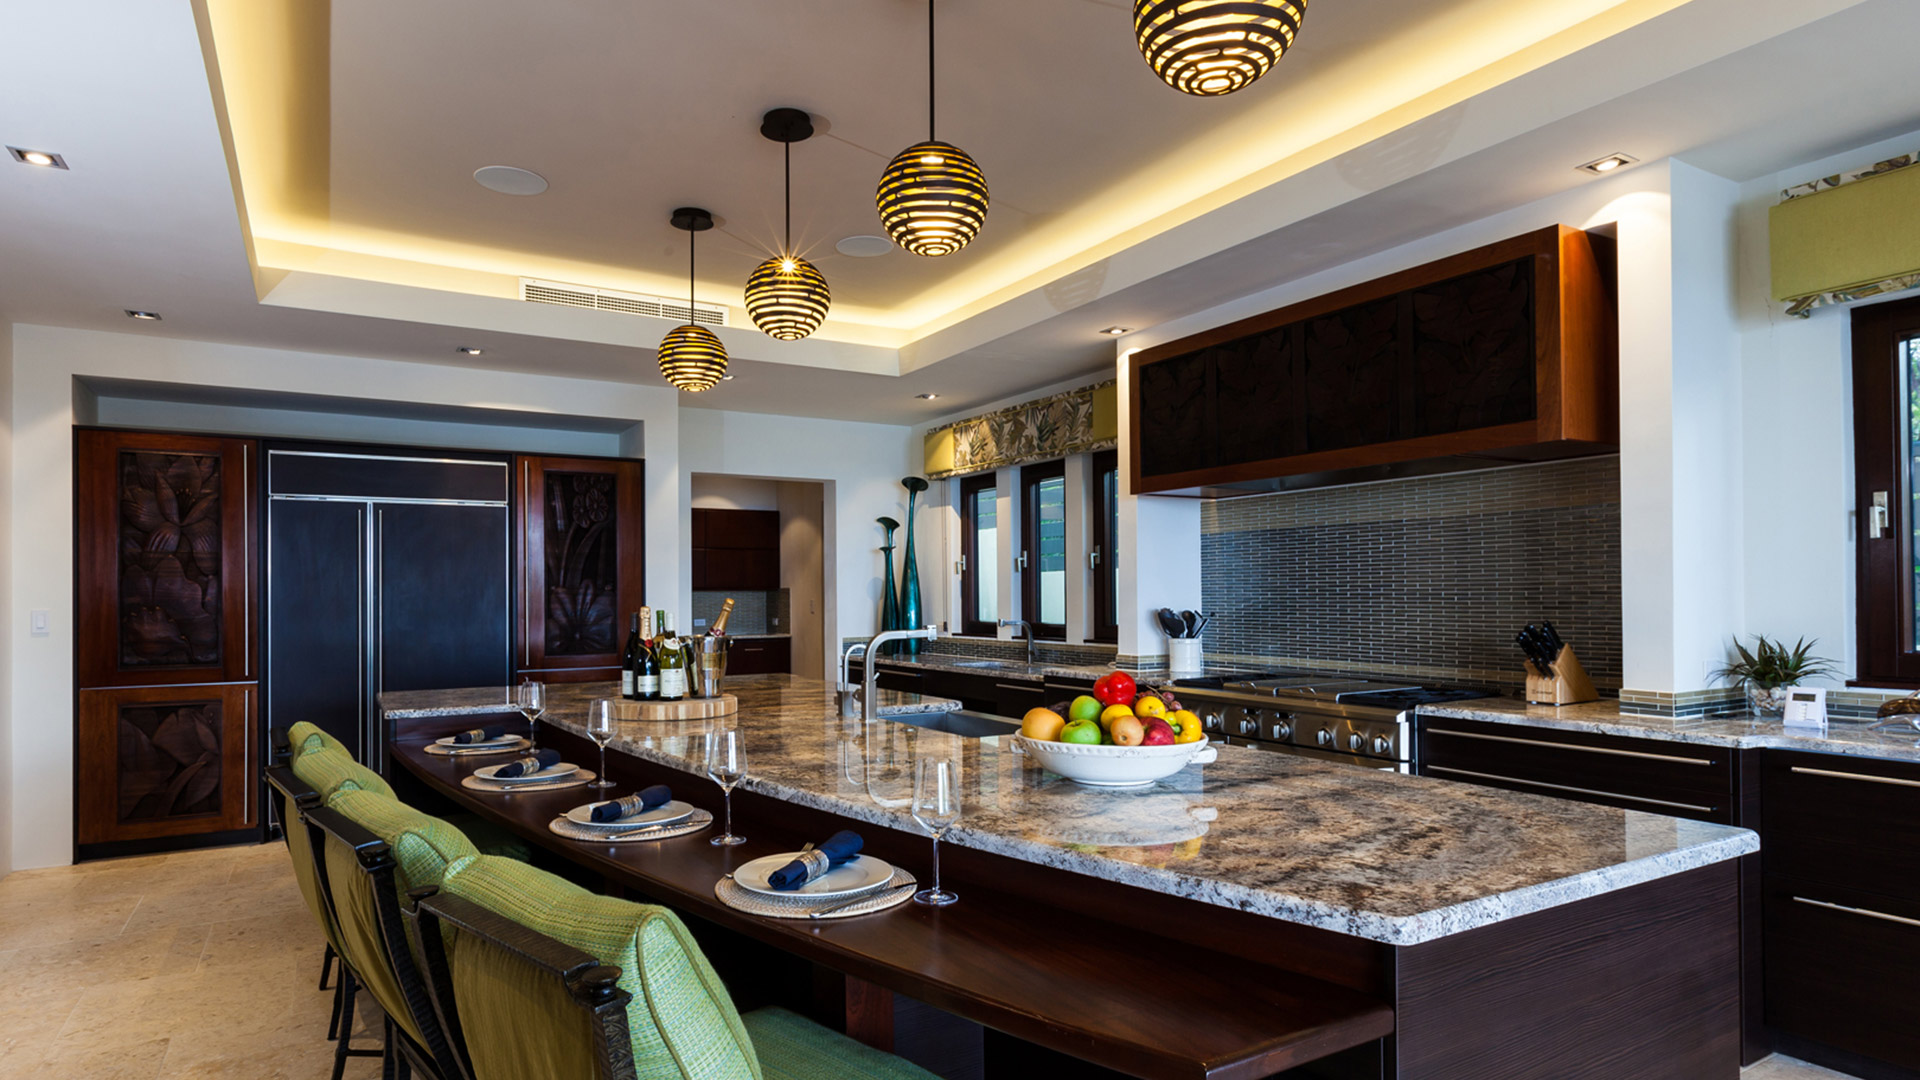 Nevaeh VIlla has an open kitchen where the guests can cook on their own or enjoy private chef 